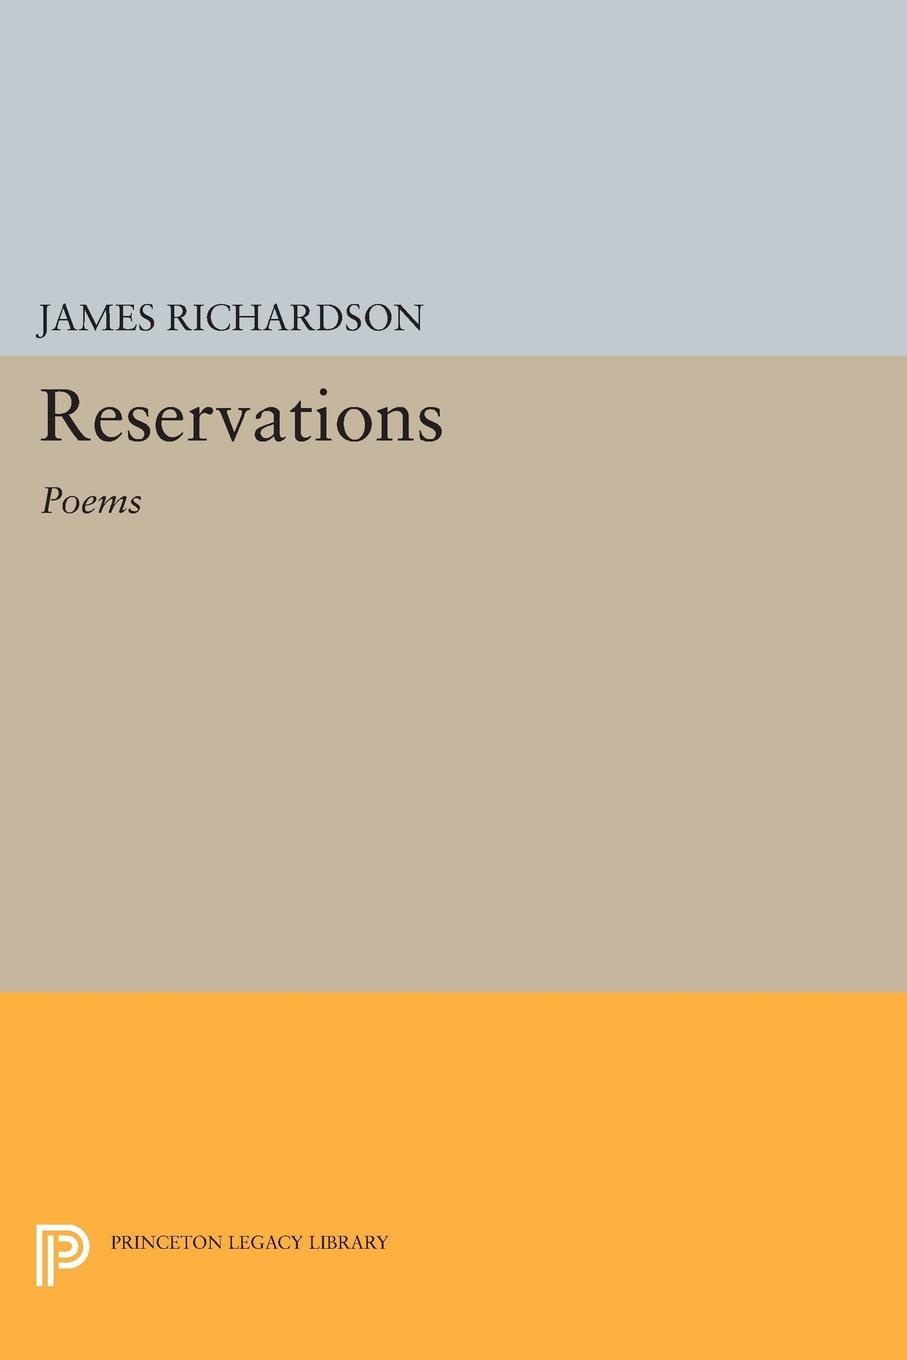 Reservations. Poems